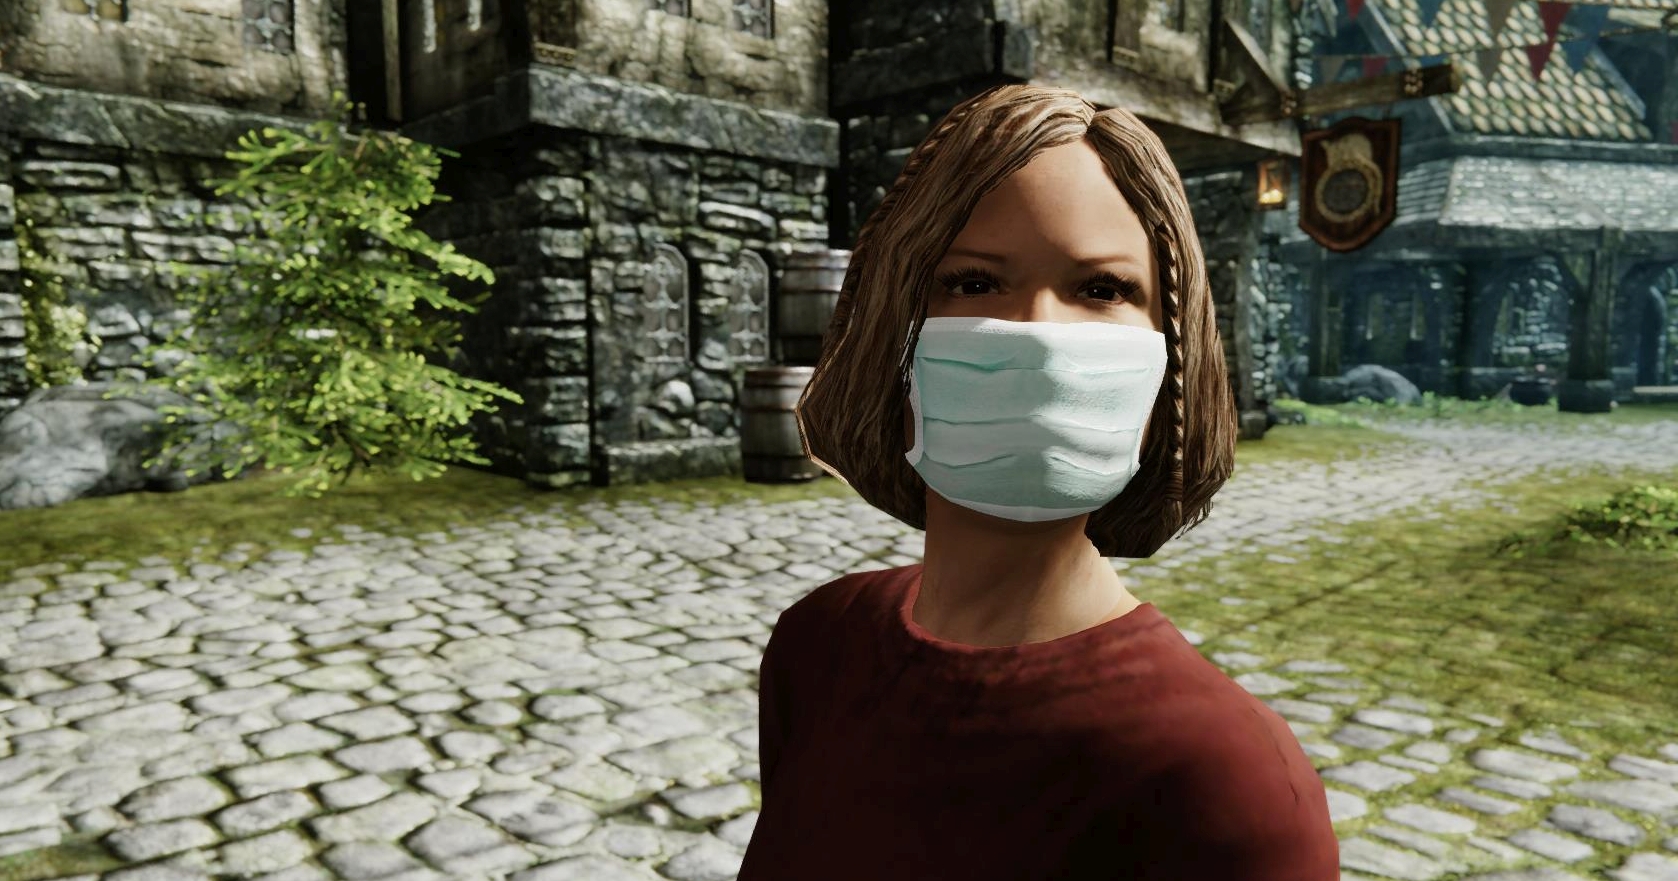 Skyrim on Quarantine Mod Creates Immersive In-Game Social Distancing Experience